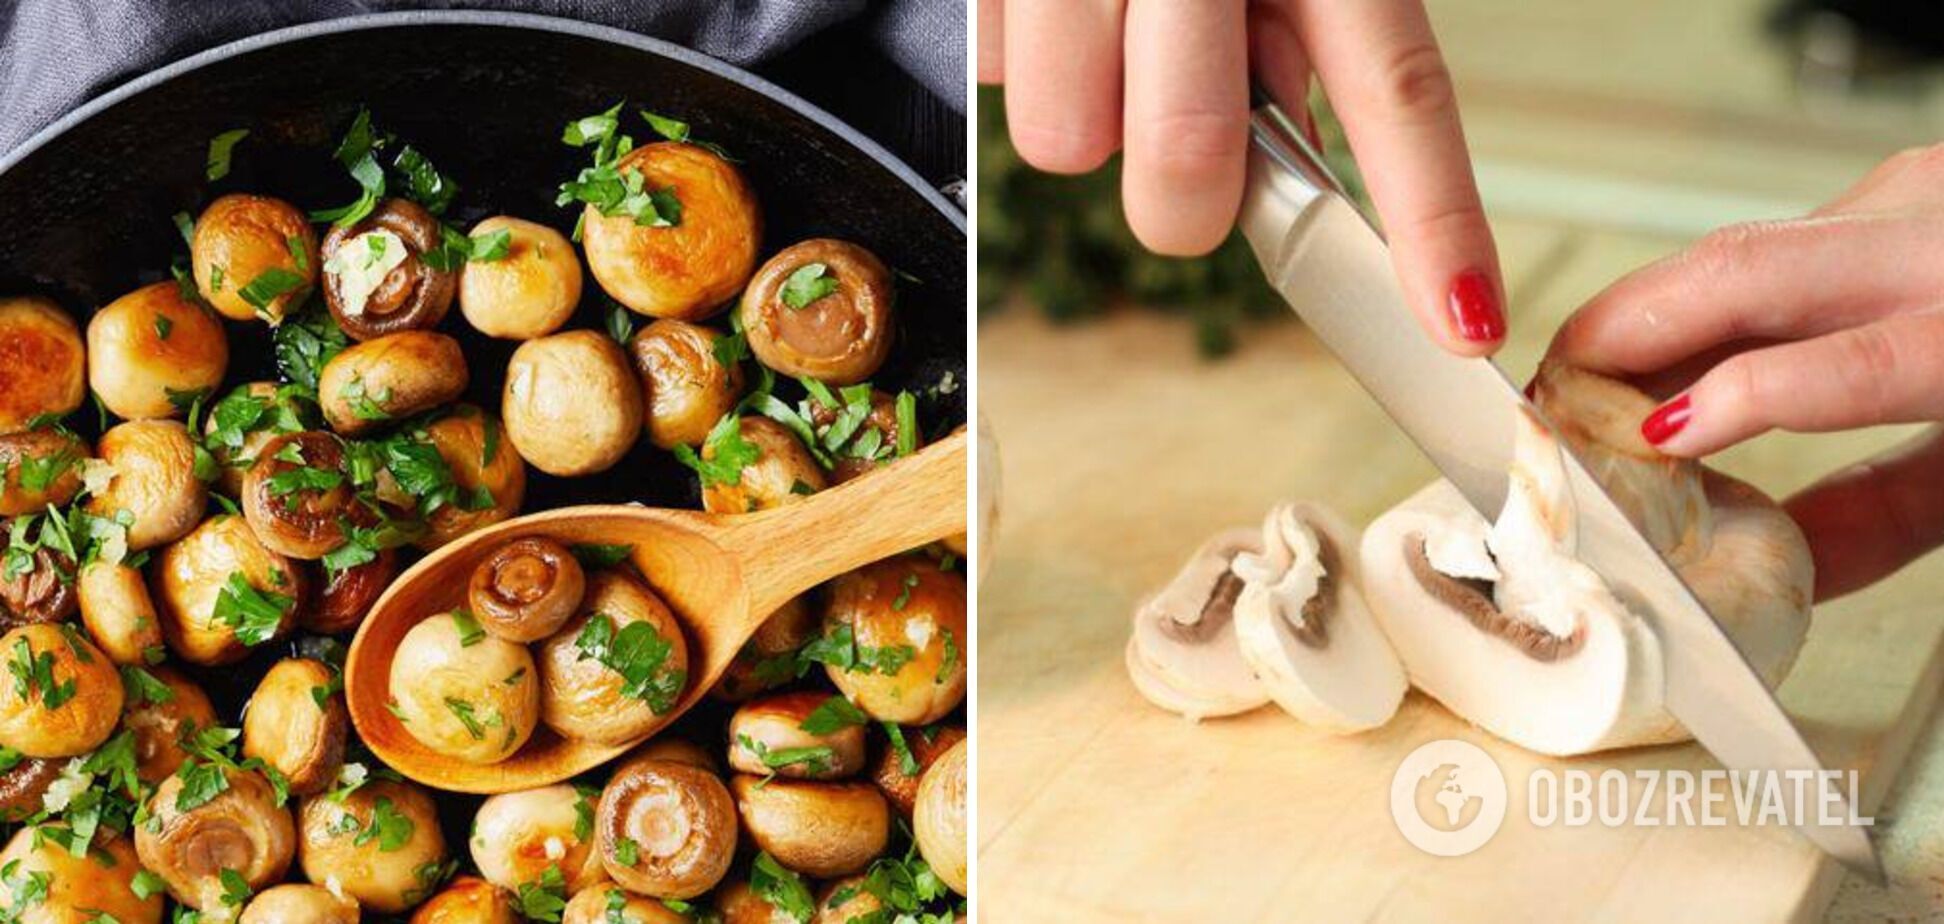 What to cook with mushrooms